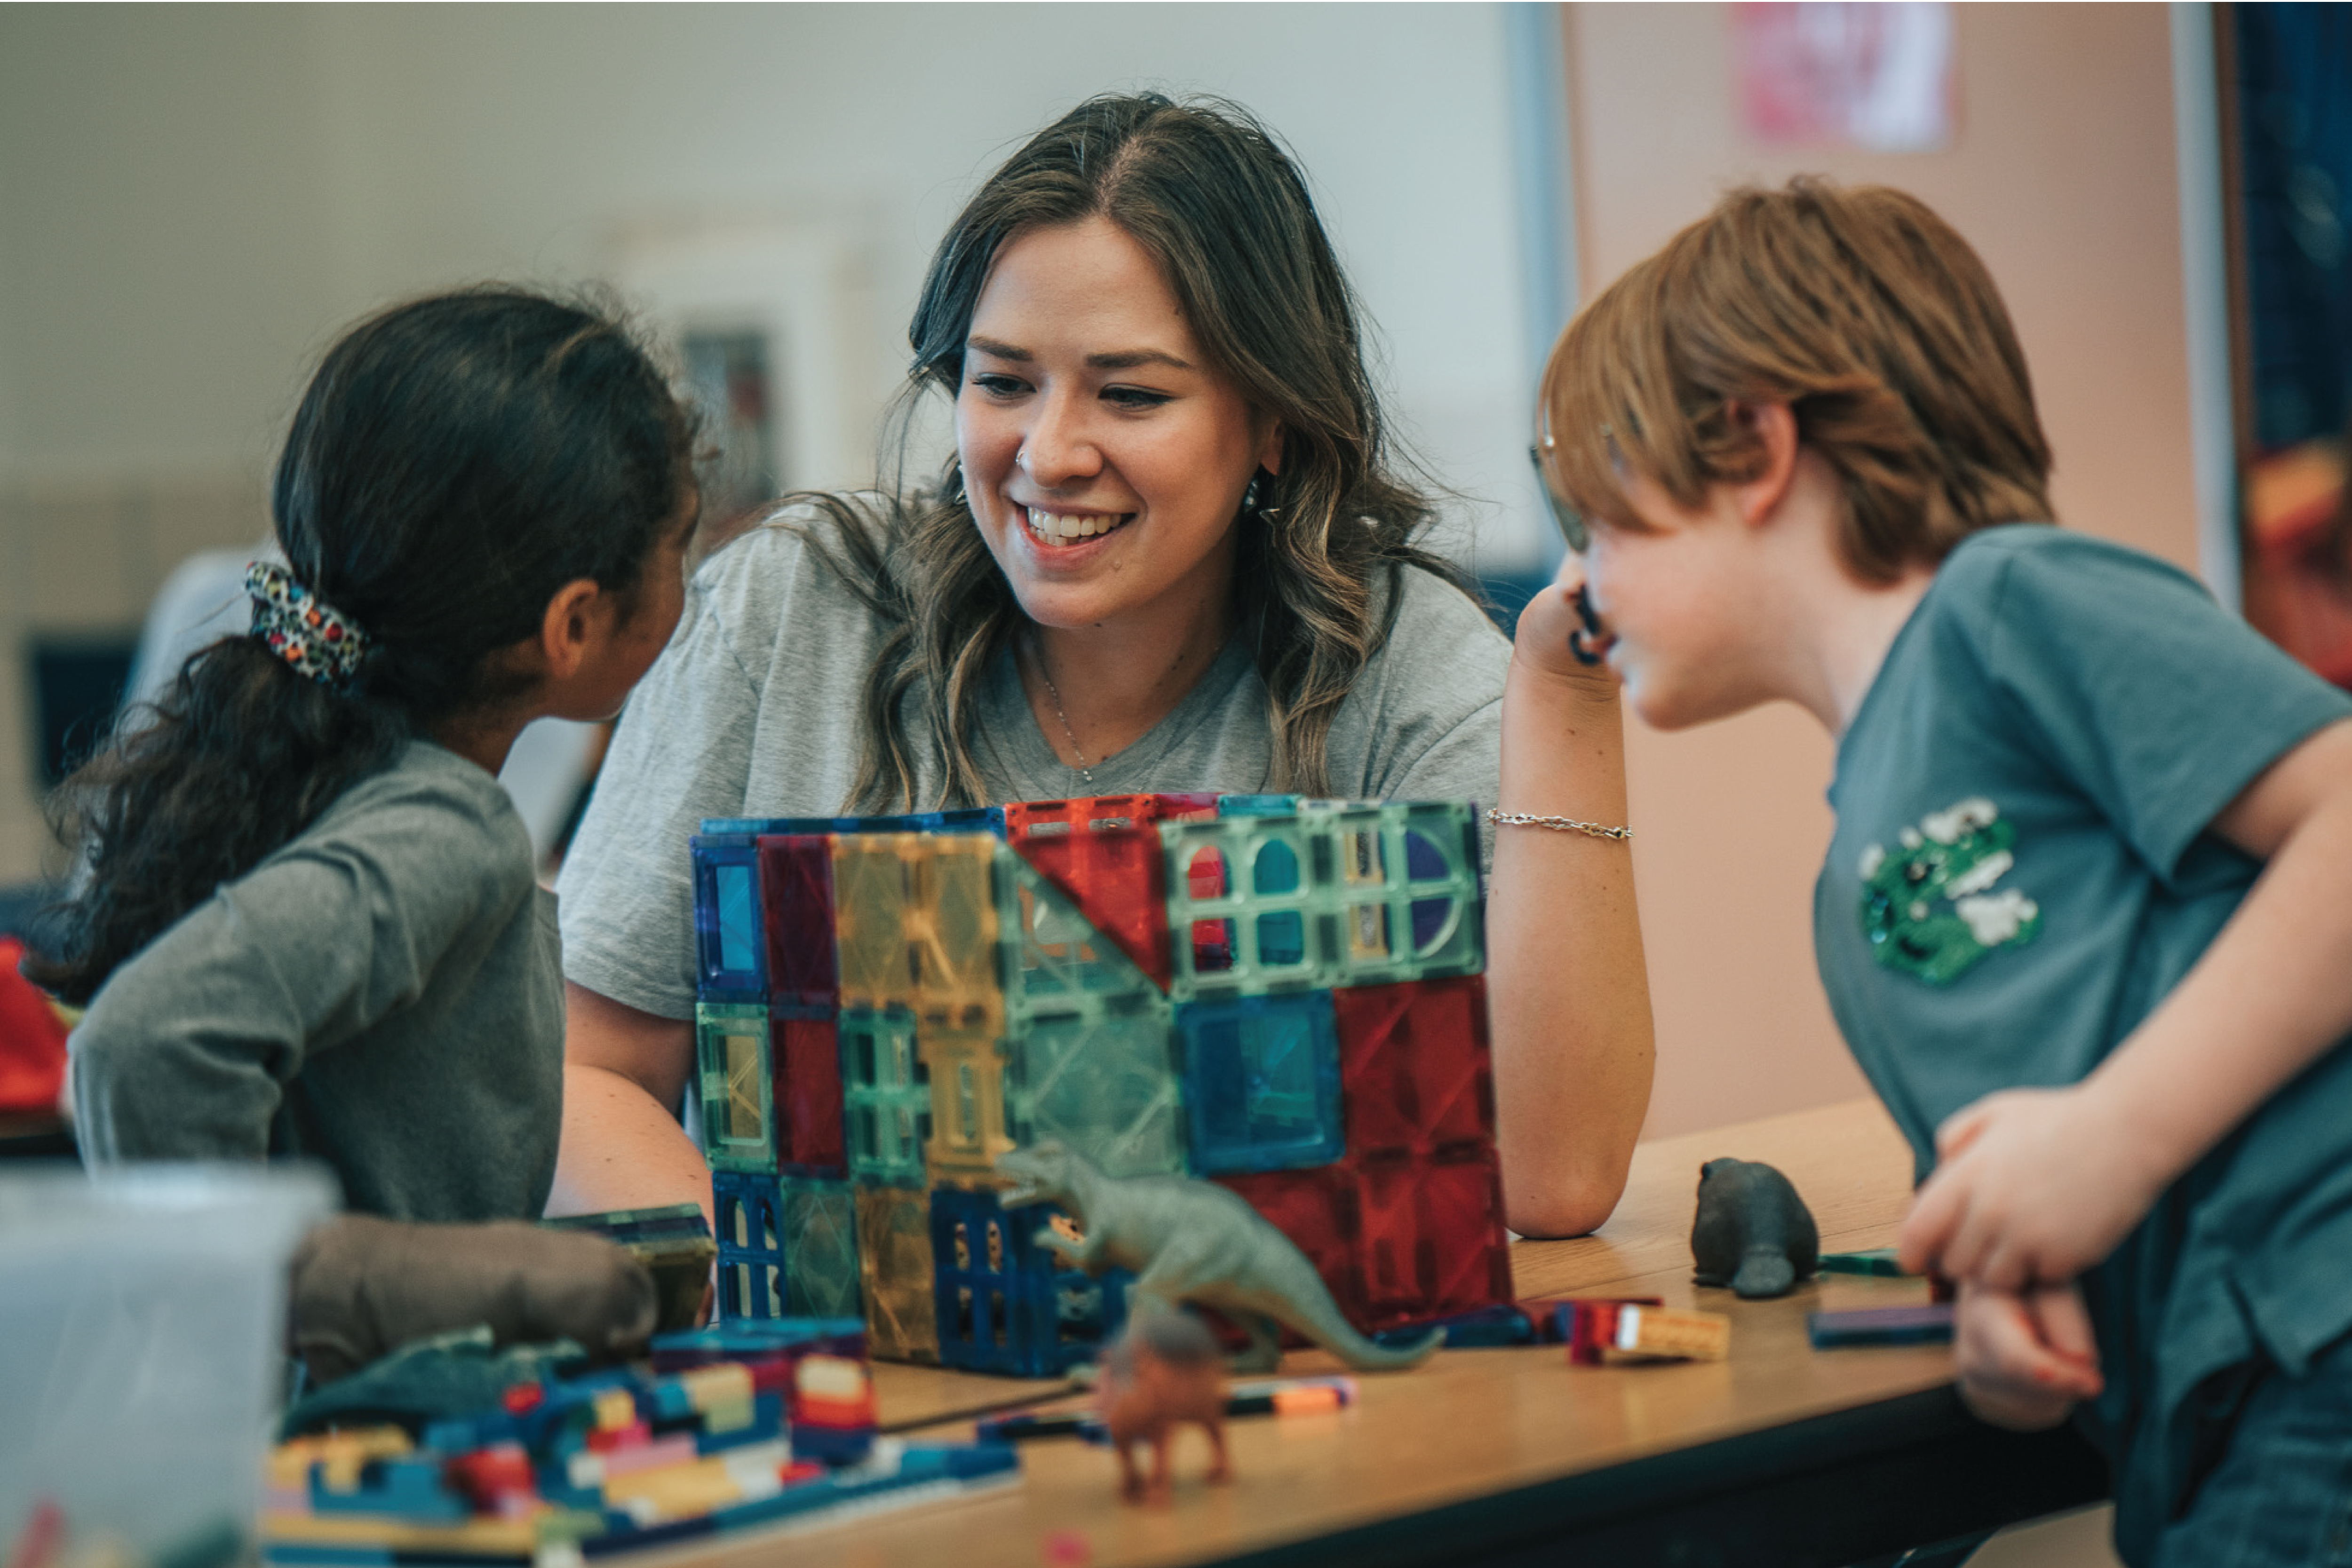 A youth development leader sits at a table with two children playing with colorful magnet tiles. The teacher is looking and smiling at one of the children while the other child looks on from the other side of the table.